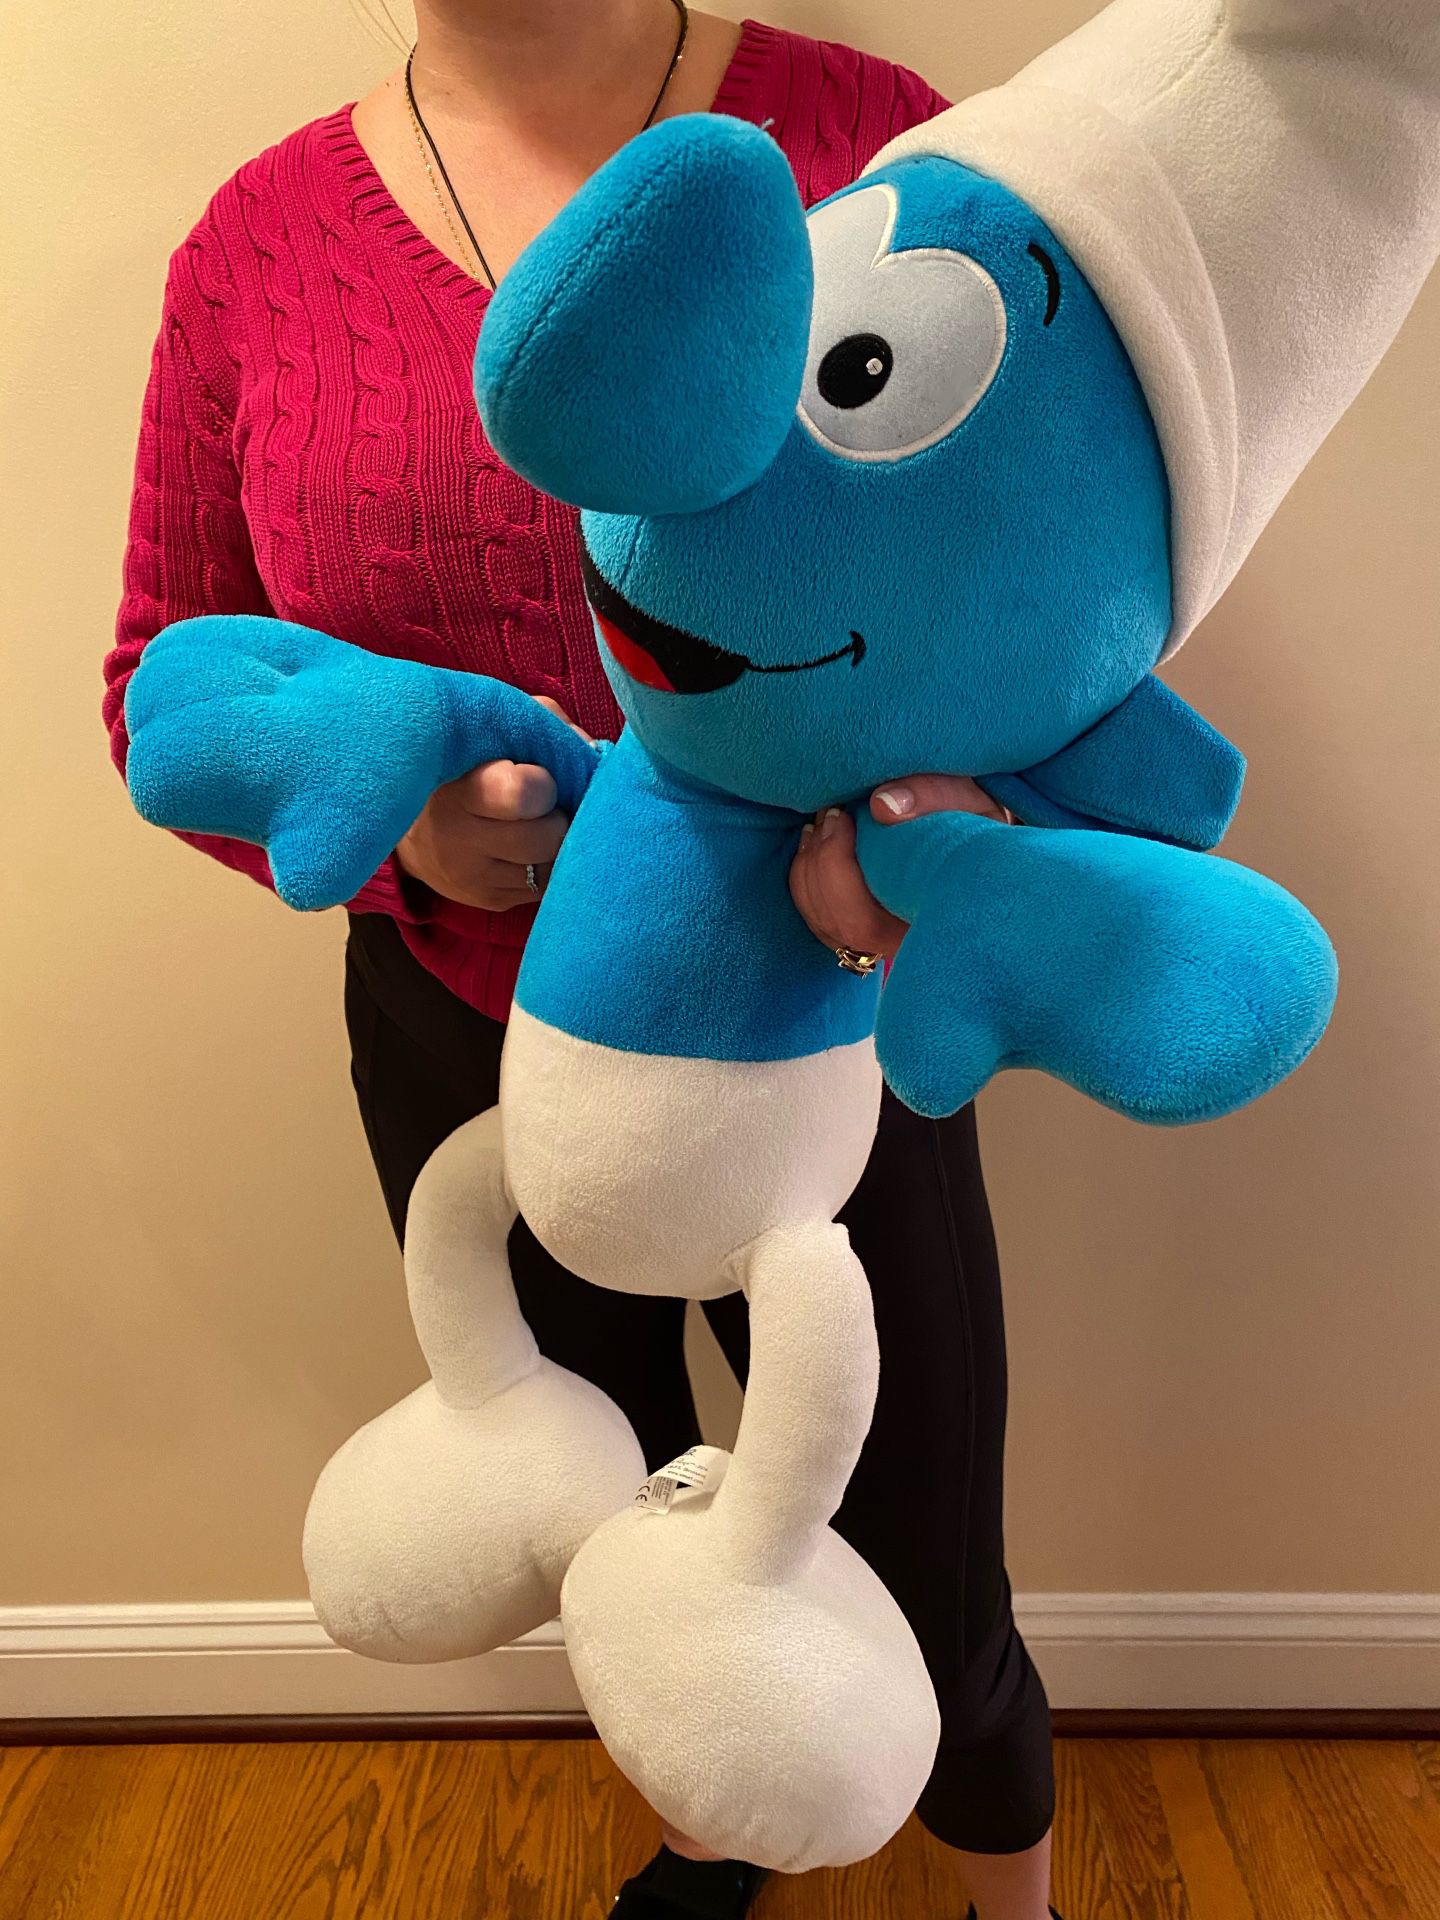 Giant Smurf Plush, 2 Feet and 9 inches Tall, Good Quality, Limited Editon, $100 Value, Kids Toys